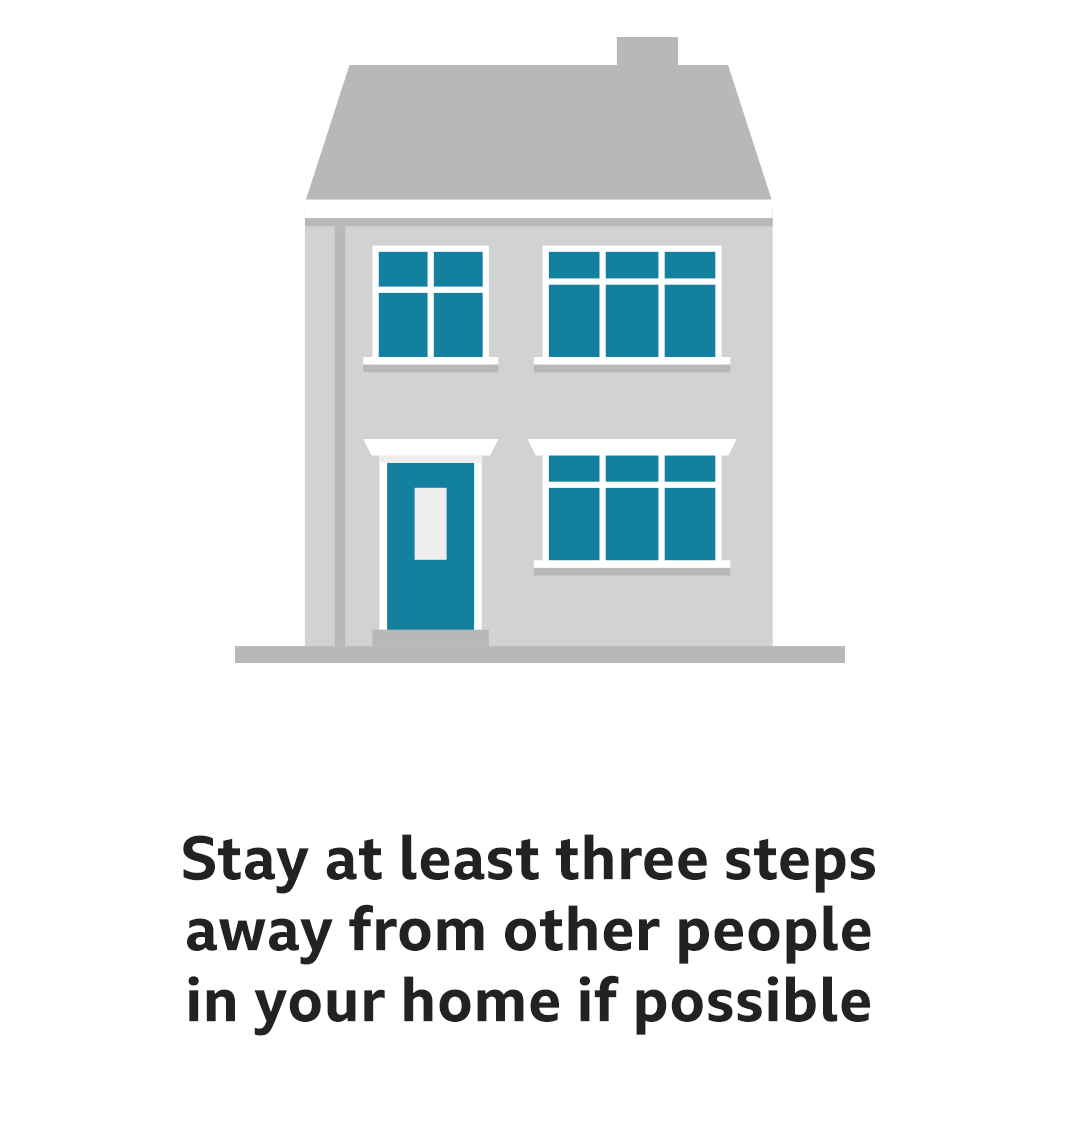 Text reads: Stay at least three steps away from other people in your home if possible